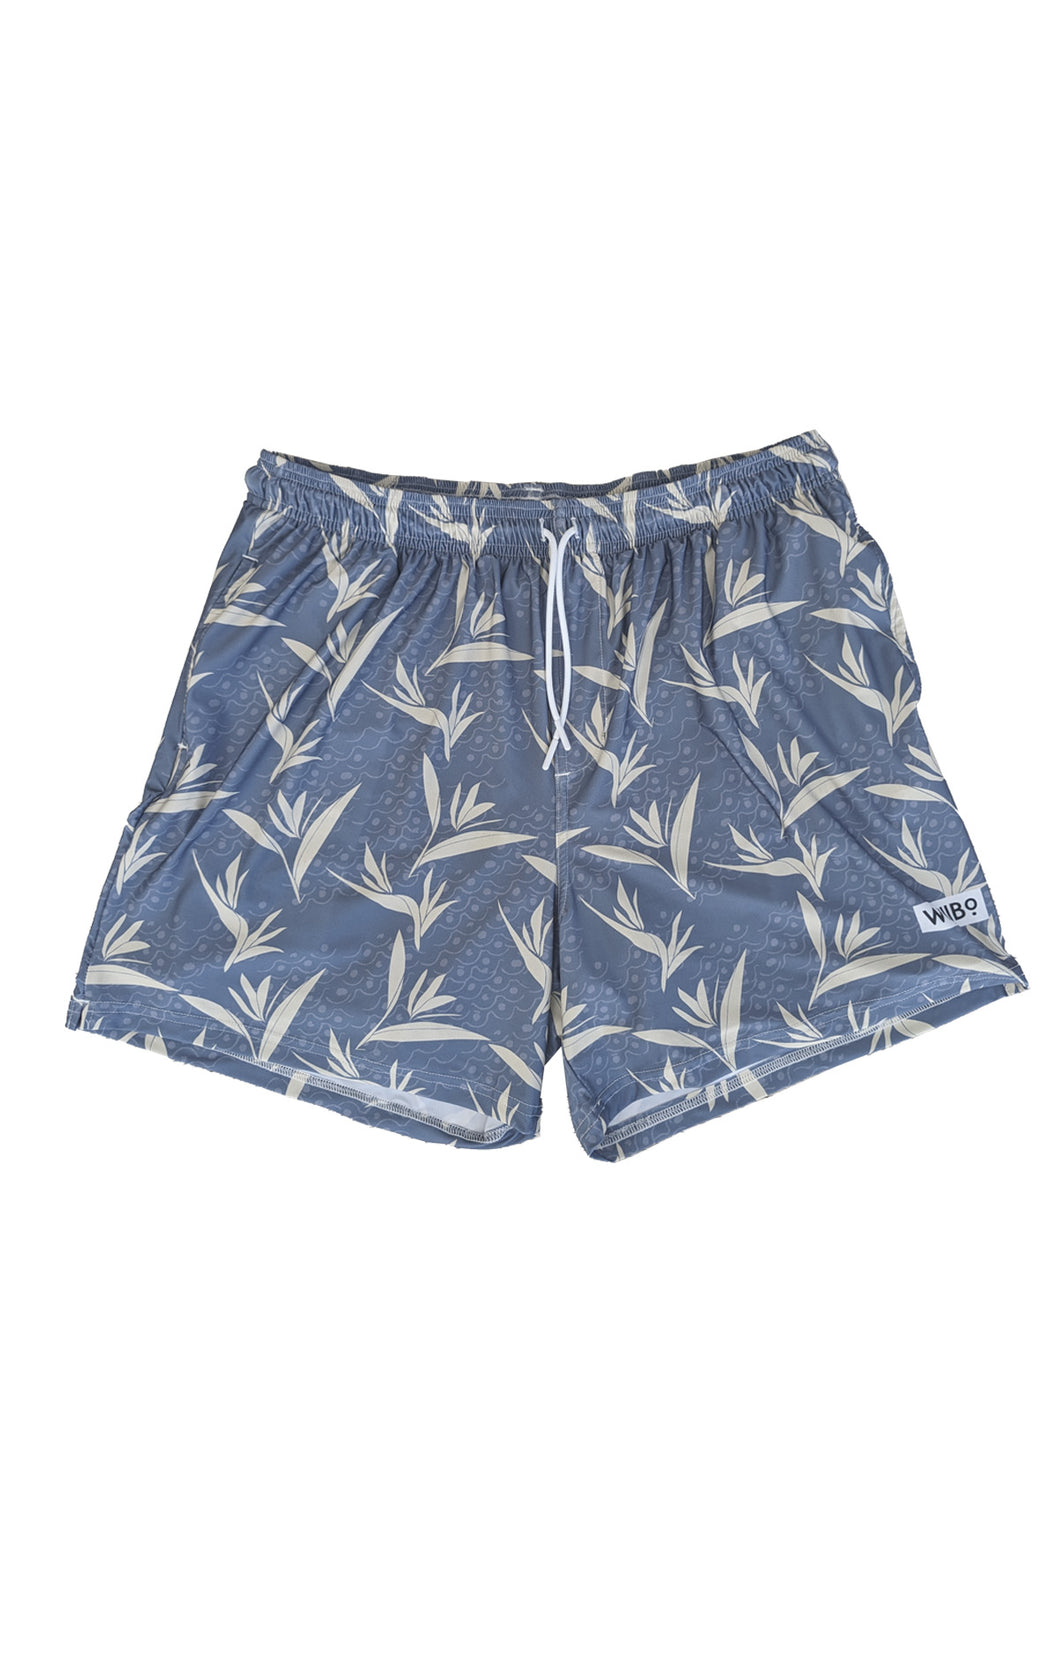 Sideout x Willbo Men's Birds of Paradise Volley Shorts